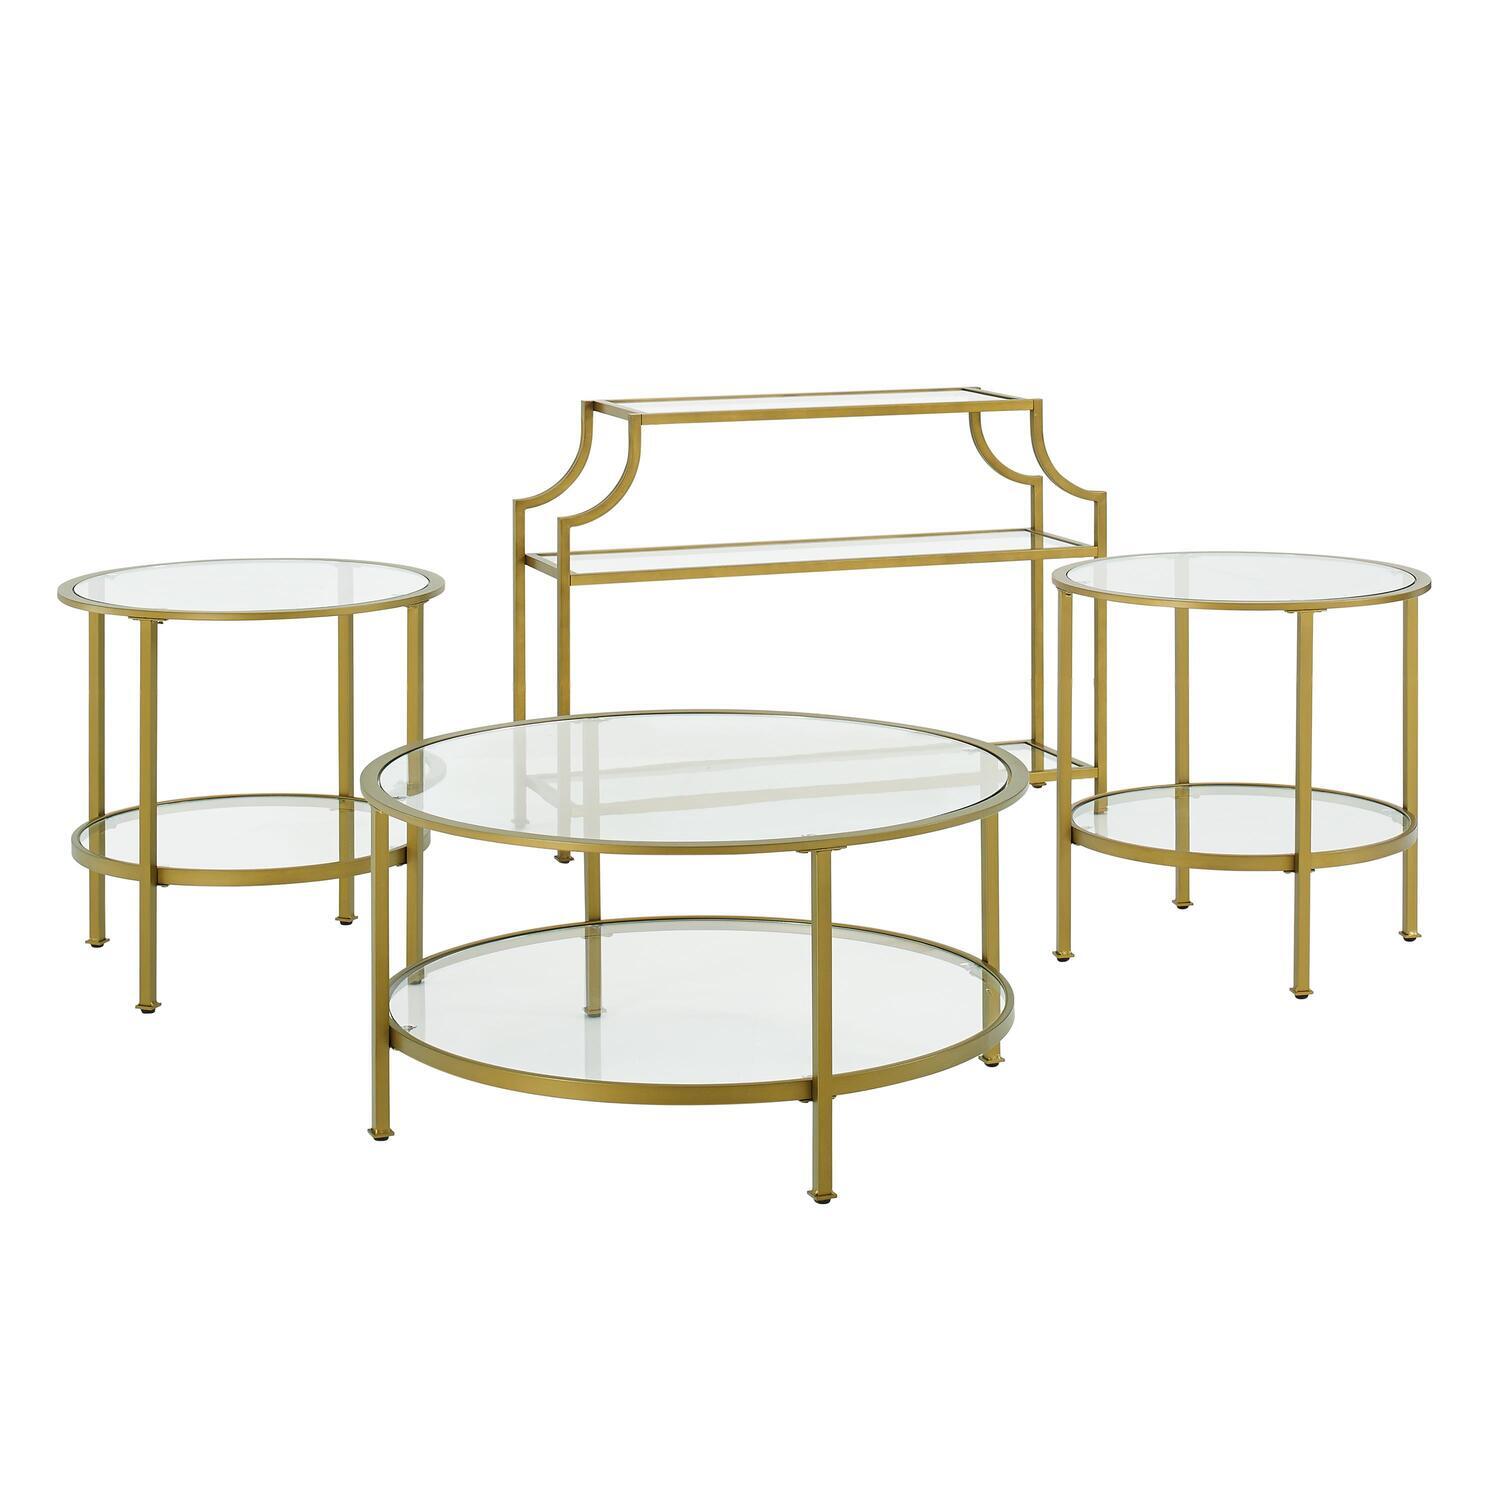 Crosley Aimee 4Pc Coffee Table Set Soft Gold - Console, Coffee, & 2 End Tables - image 1 of 3